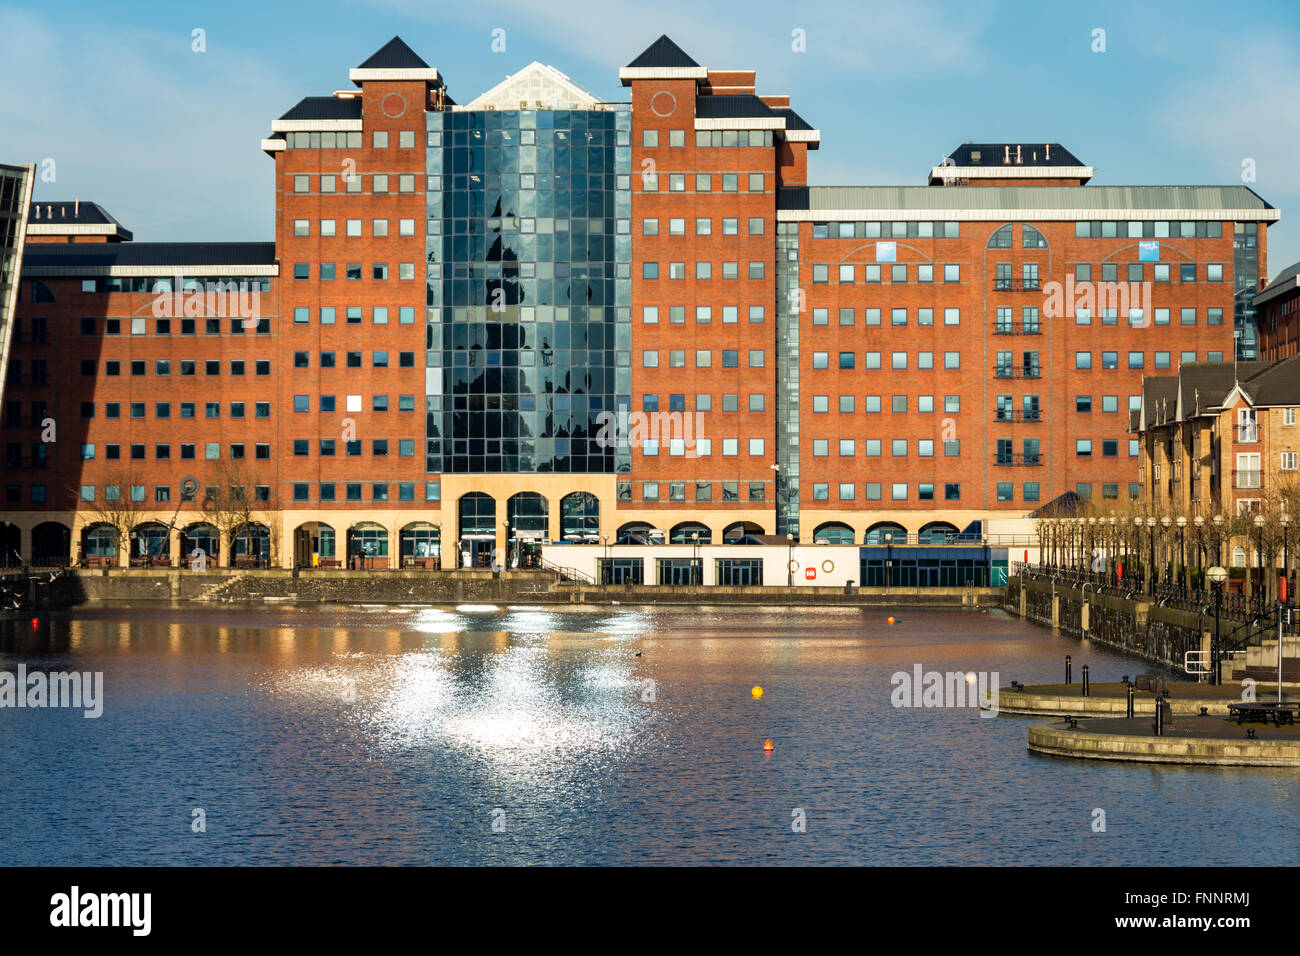 Anchorage Quay office buildings, Erie Basin, Salford Quays, Manchester, UK Stock Photo